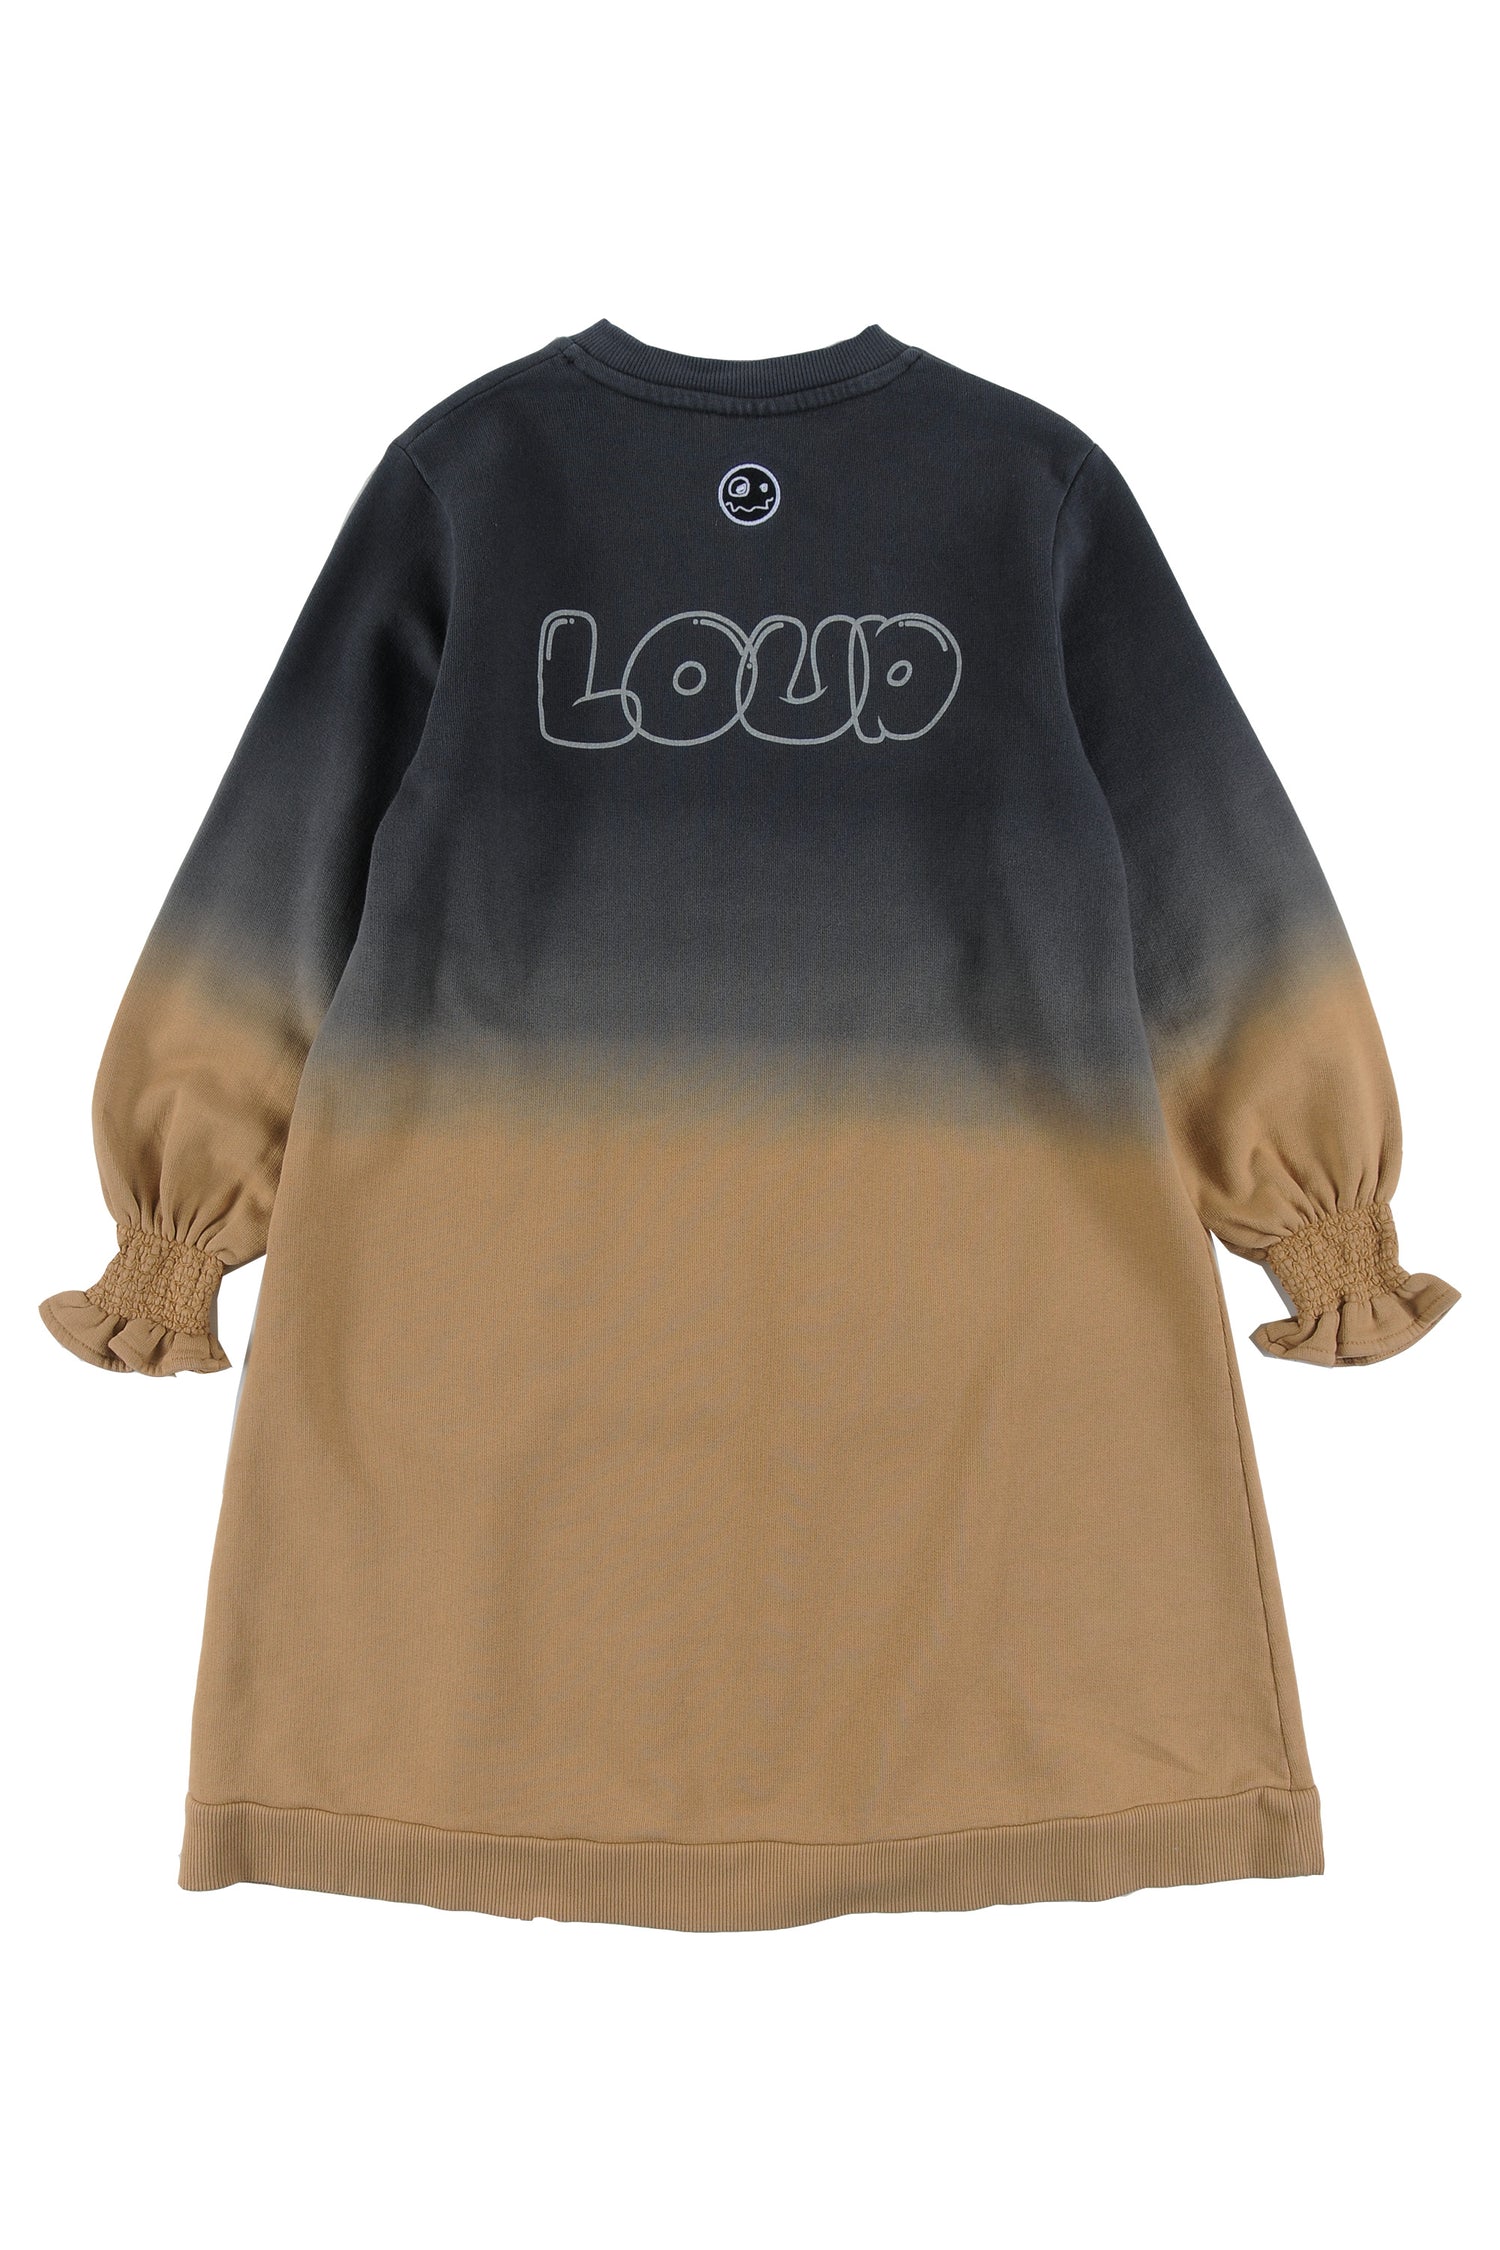 Loud Apparel Blue and Mustard Two Tone Ooh Dress